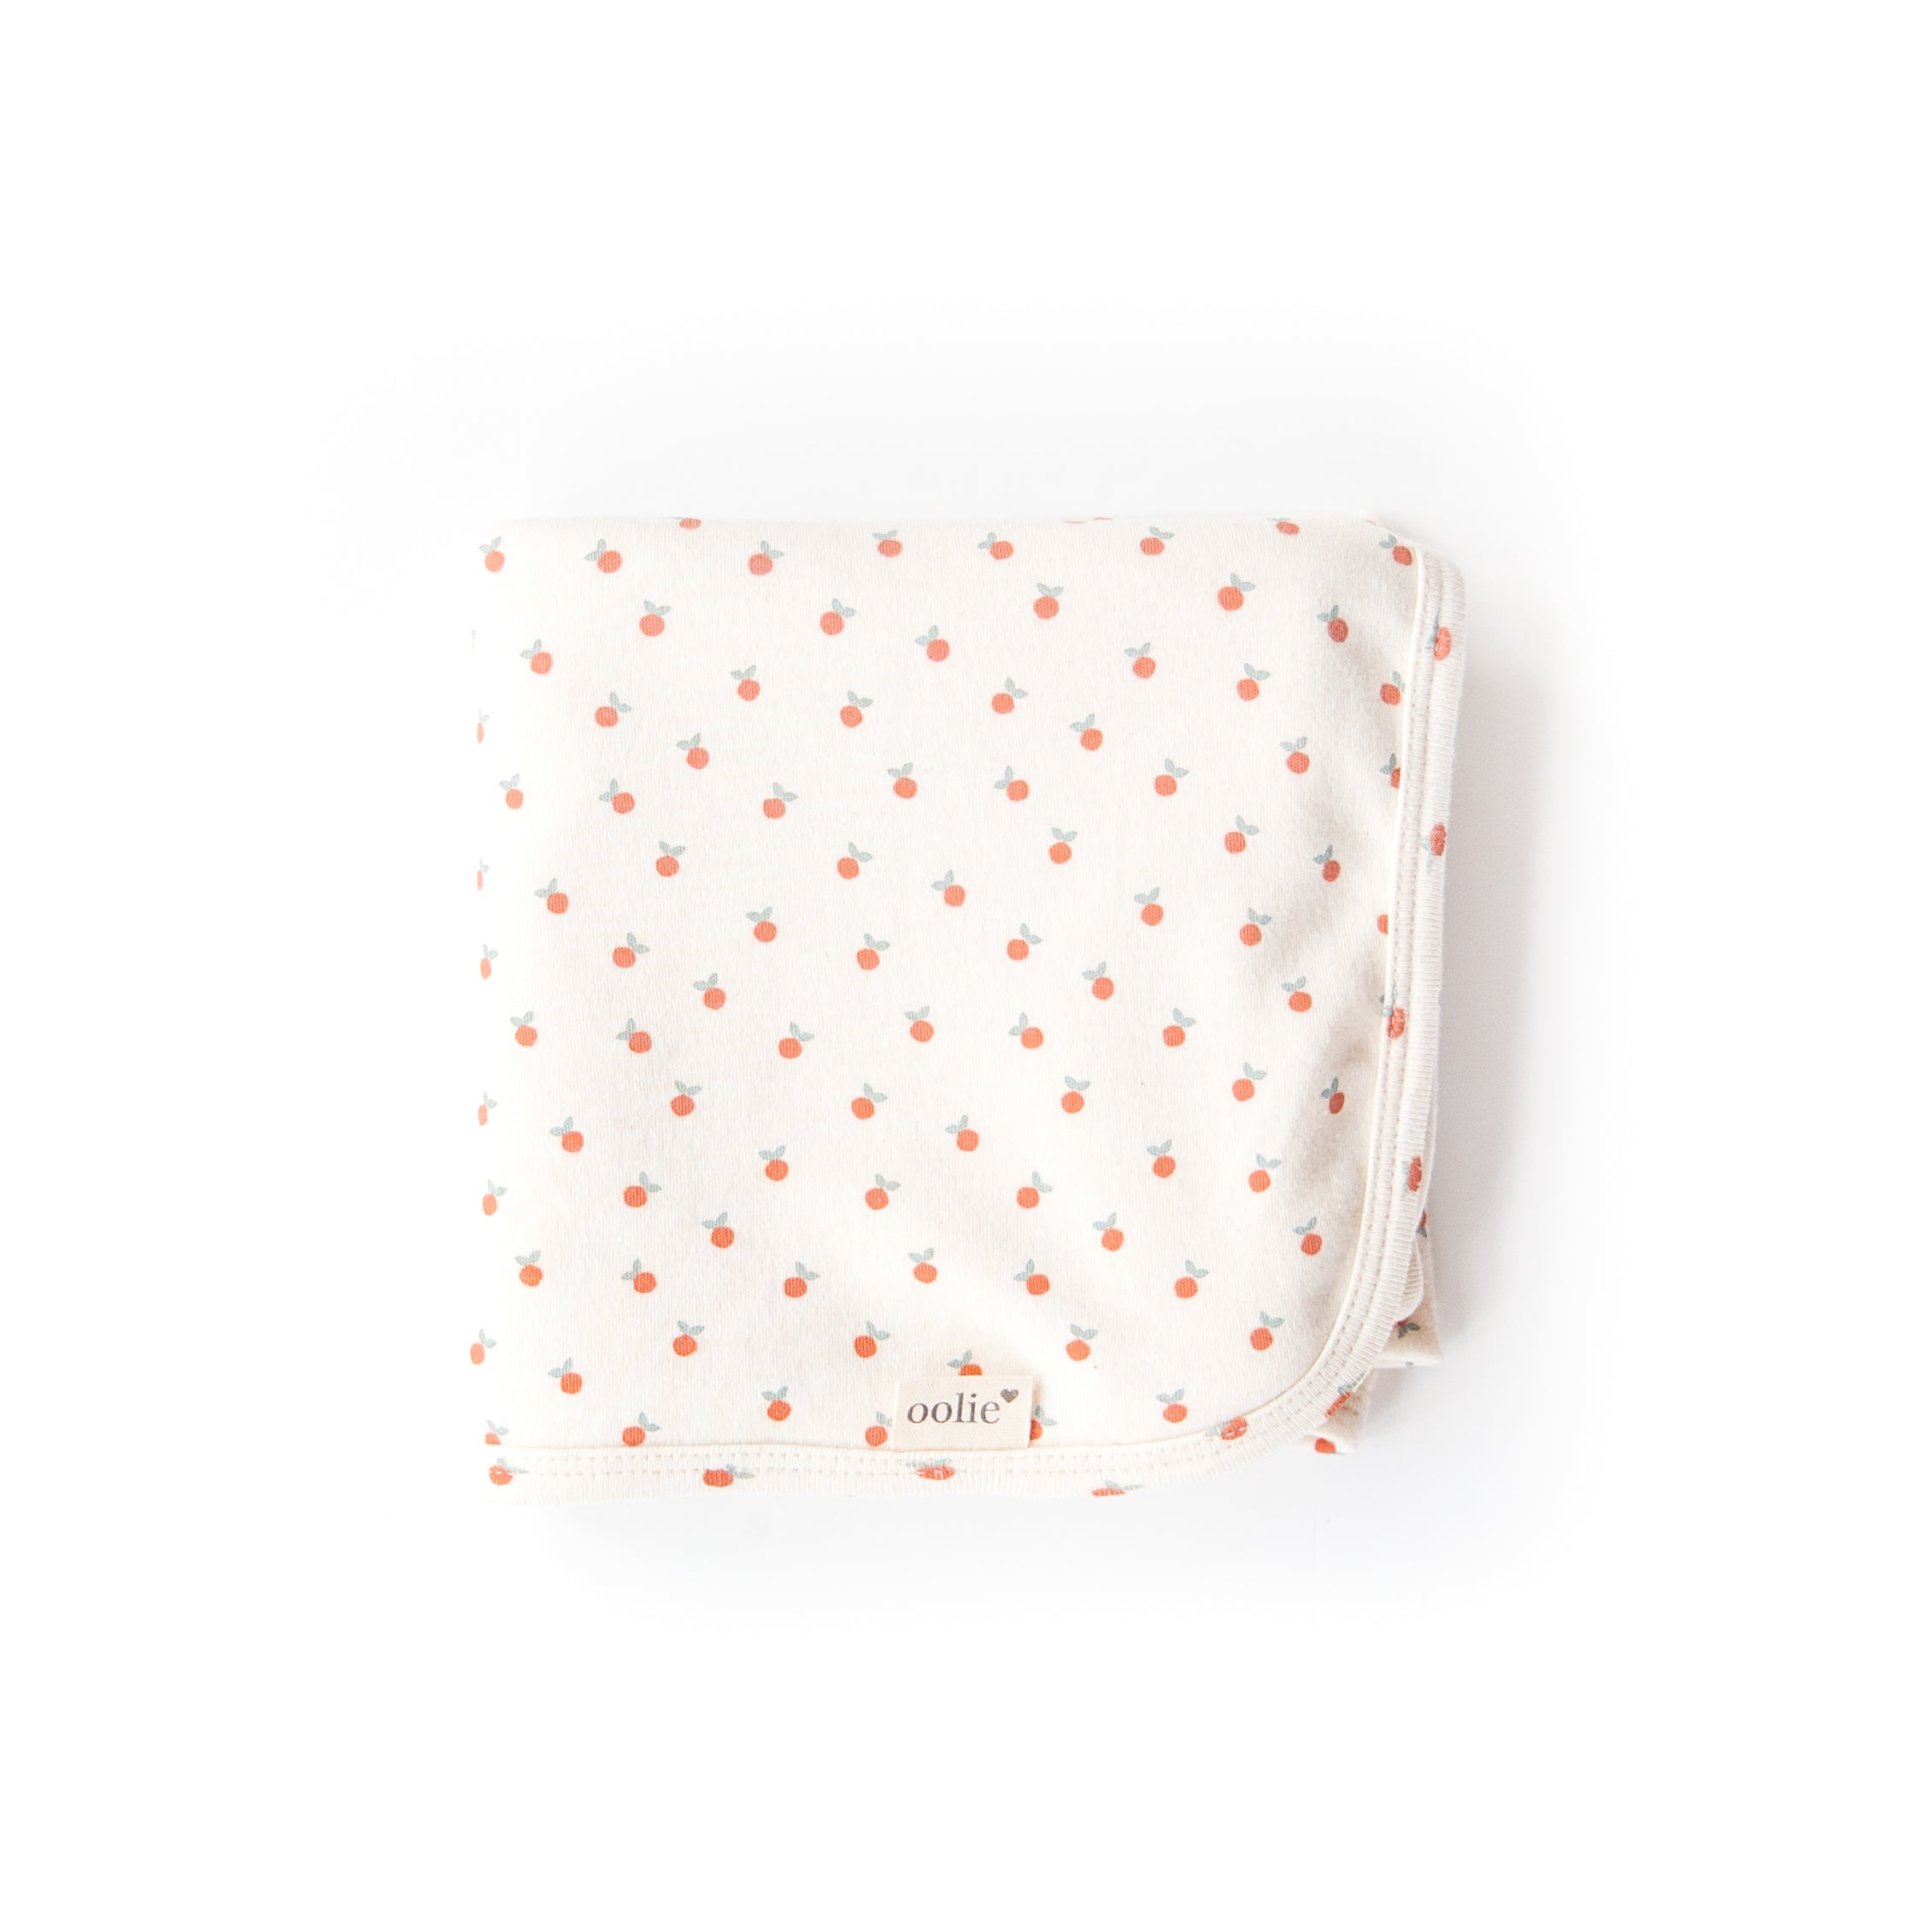 An Oolie organic cotton baby blanket with the little peach print, a natural color with tiny, irregular peaches in a repeating pattern.